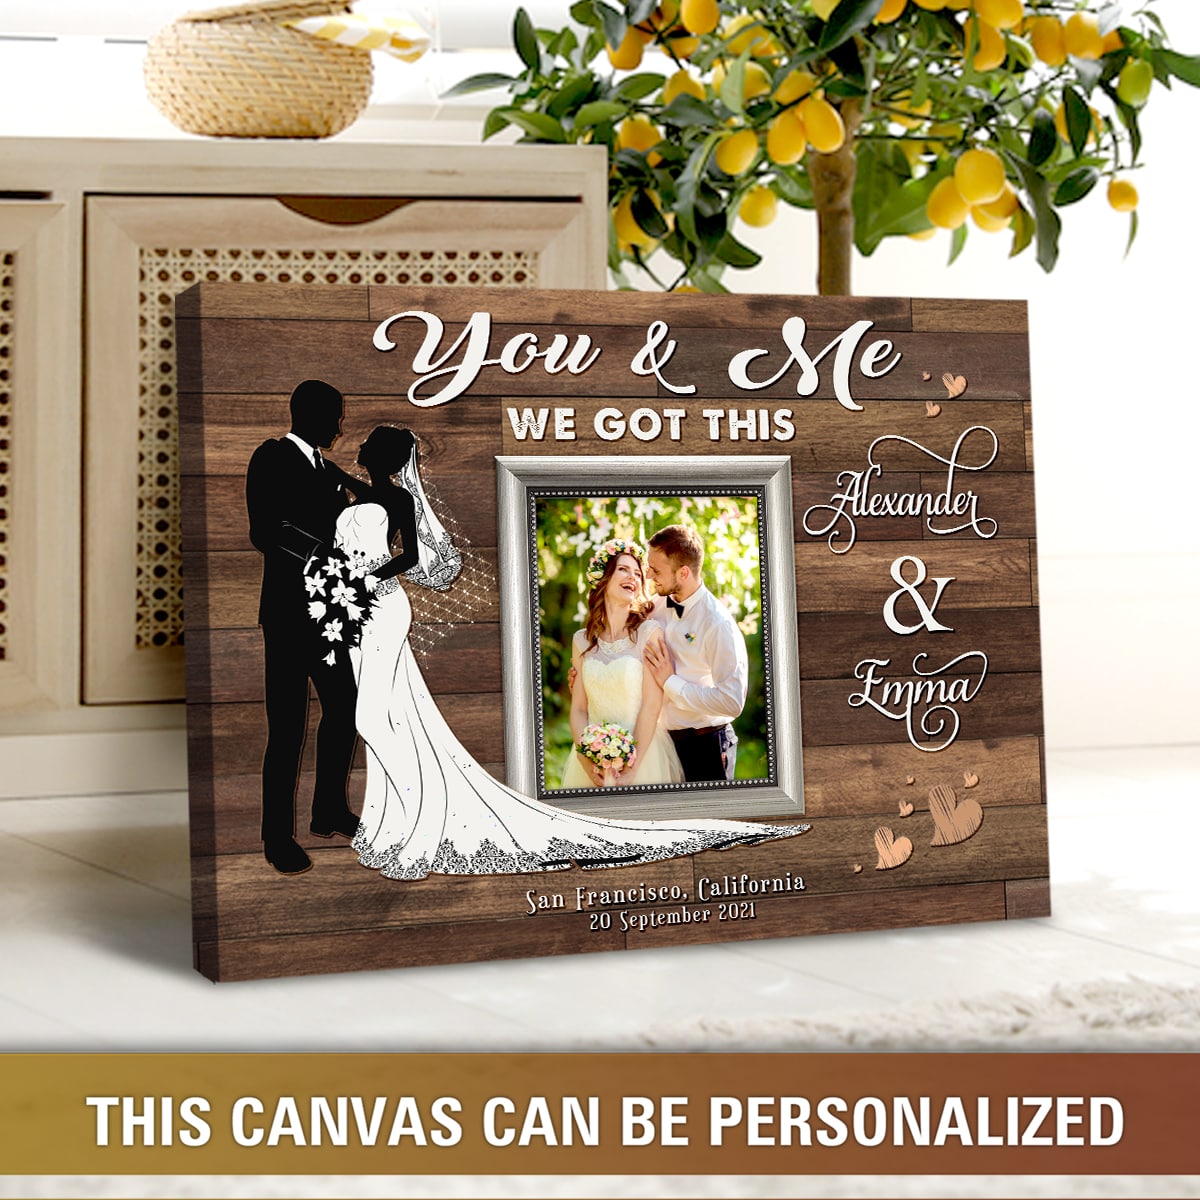 30 Truly Ultimate Wedding Gifts For Newly Married Couples  #keepsakeweddinggif…  Wedding gifts for bride and groom, Unique wedding  gifts, Personalized wedding gifts